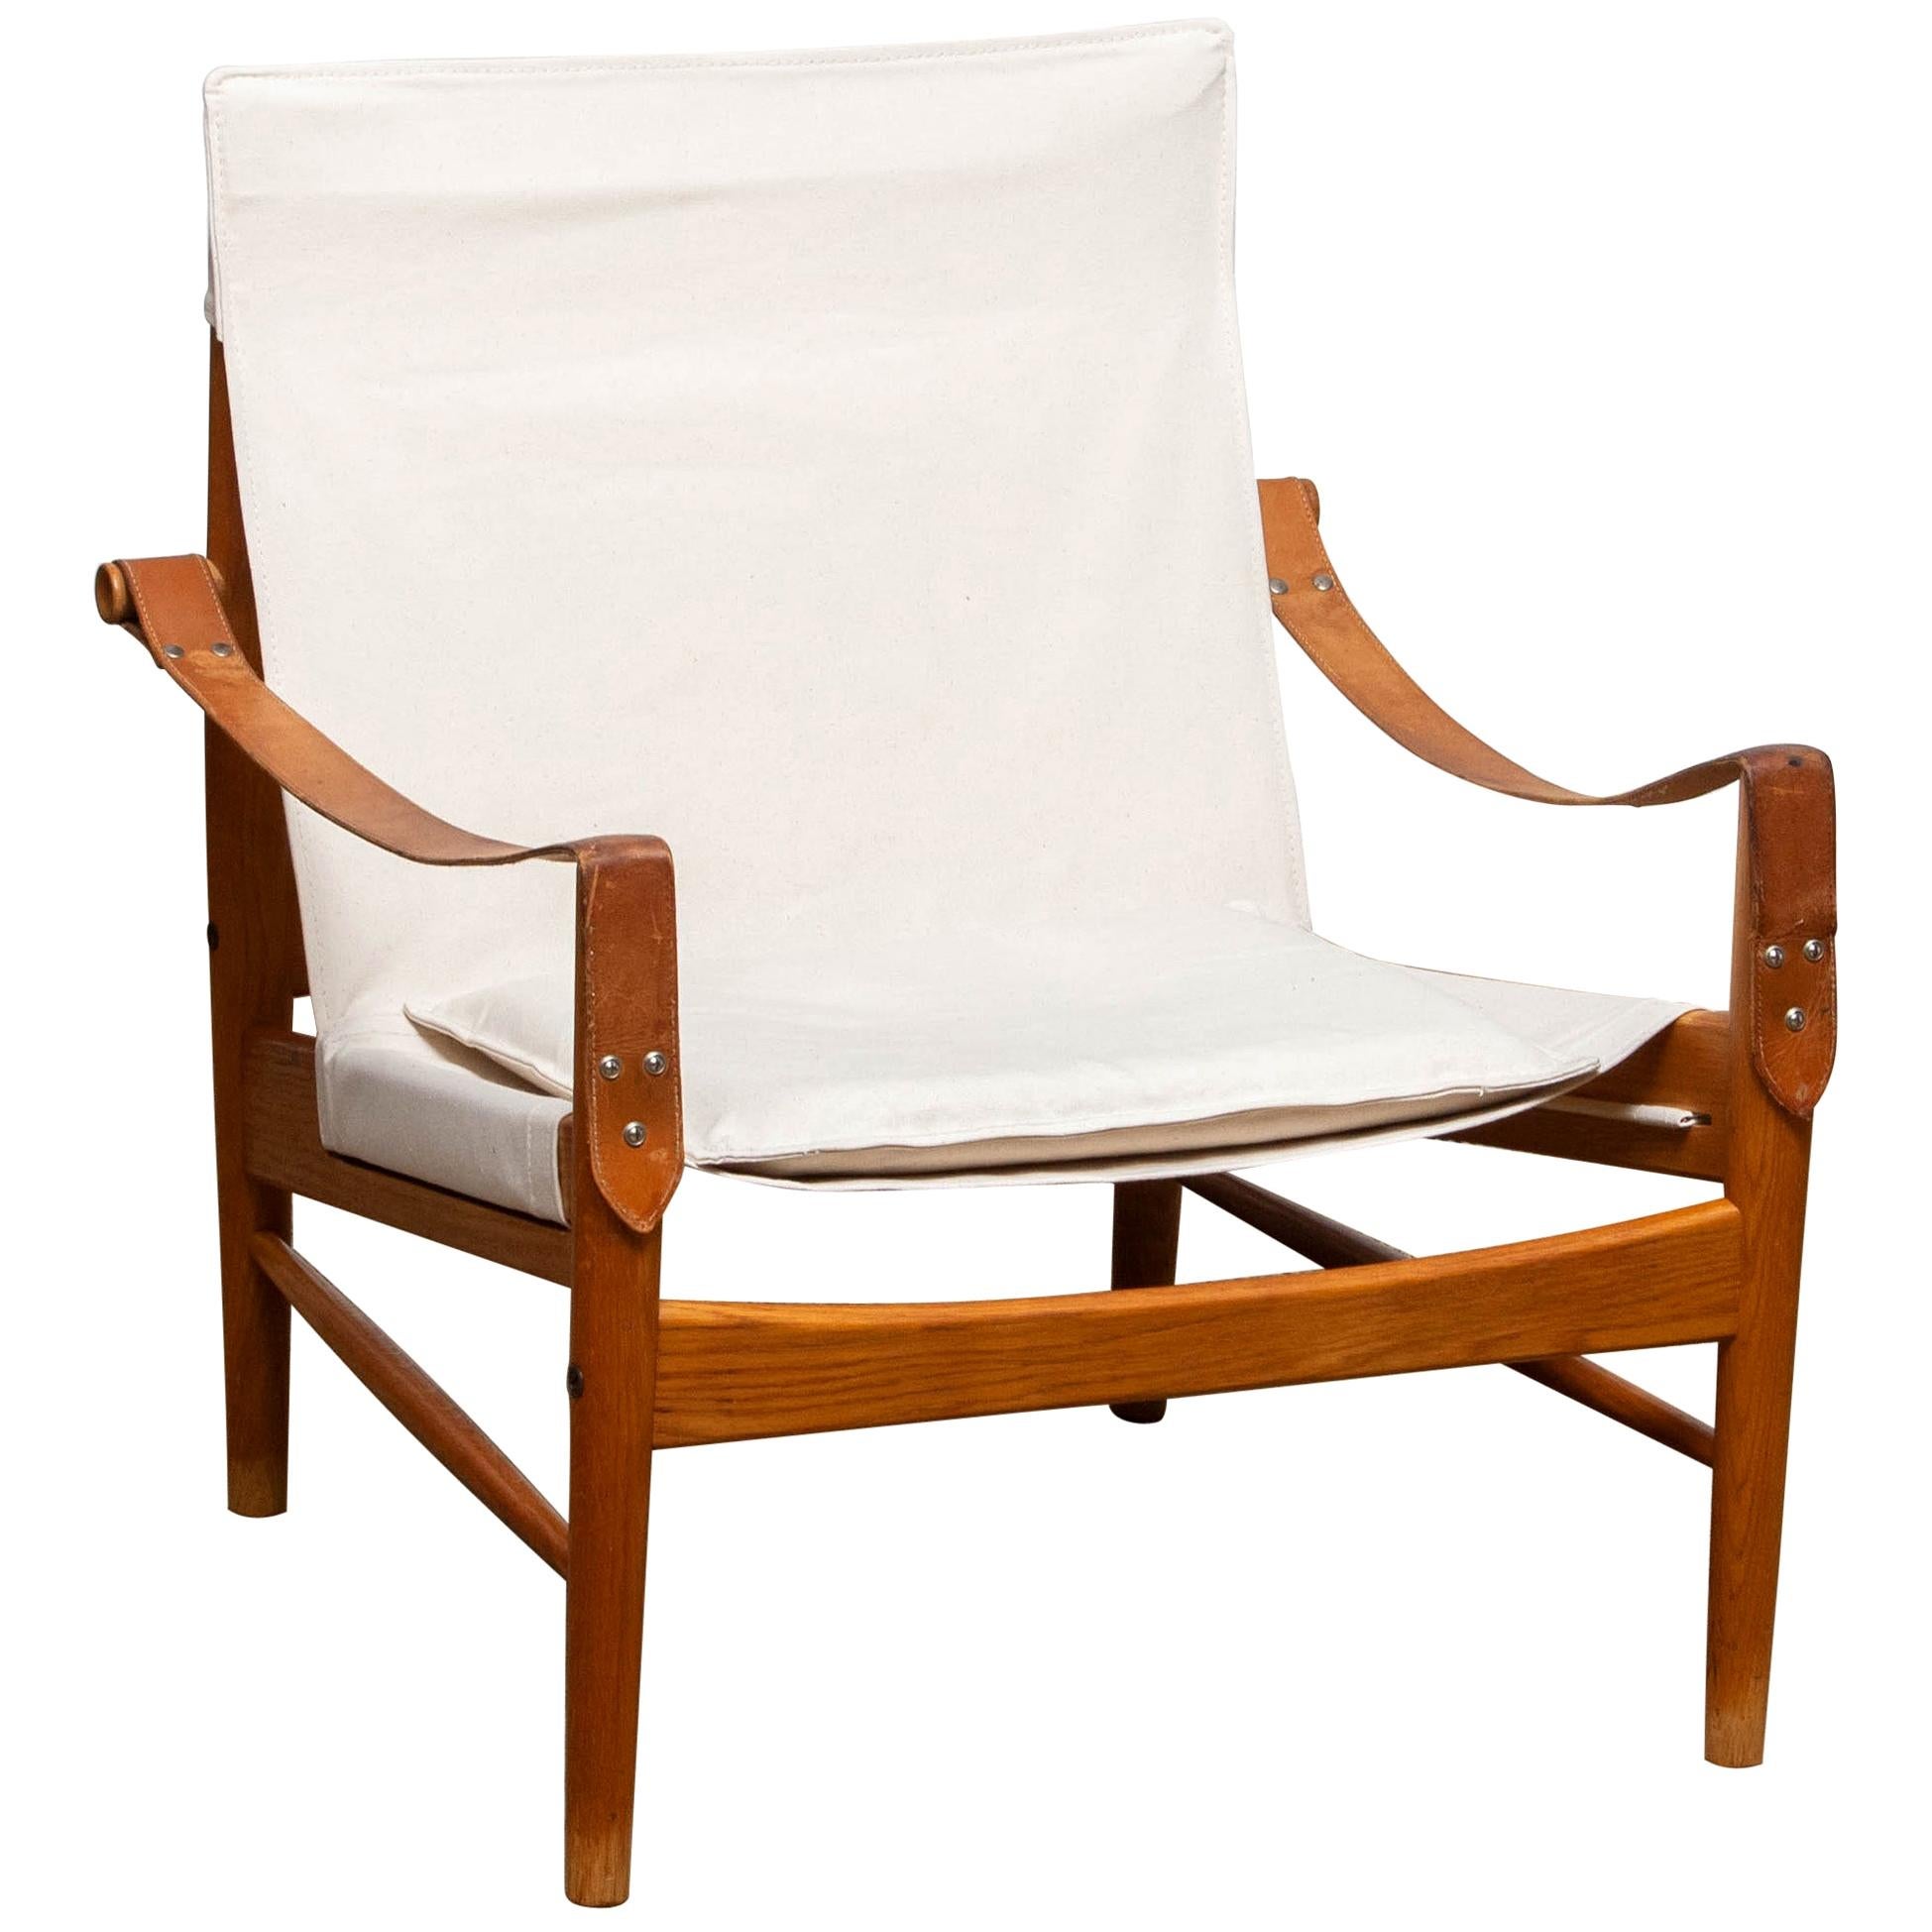 Beautiful safari chair designed by Hans Olsen for Viska Möbler in Kinna, Sweden.
This chairs are made of oak with a new canvas upholstery.
It is in a wonderful condition and marked.
Period: 1960s.
Dimensions: H 81 cm, W 73 cm, D 70 cm, SH 38 cm.